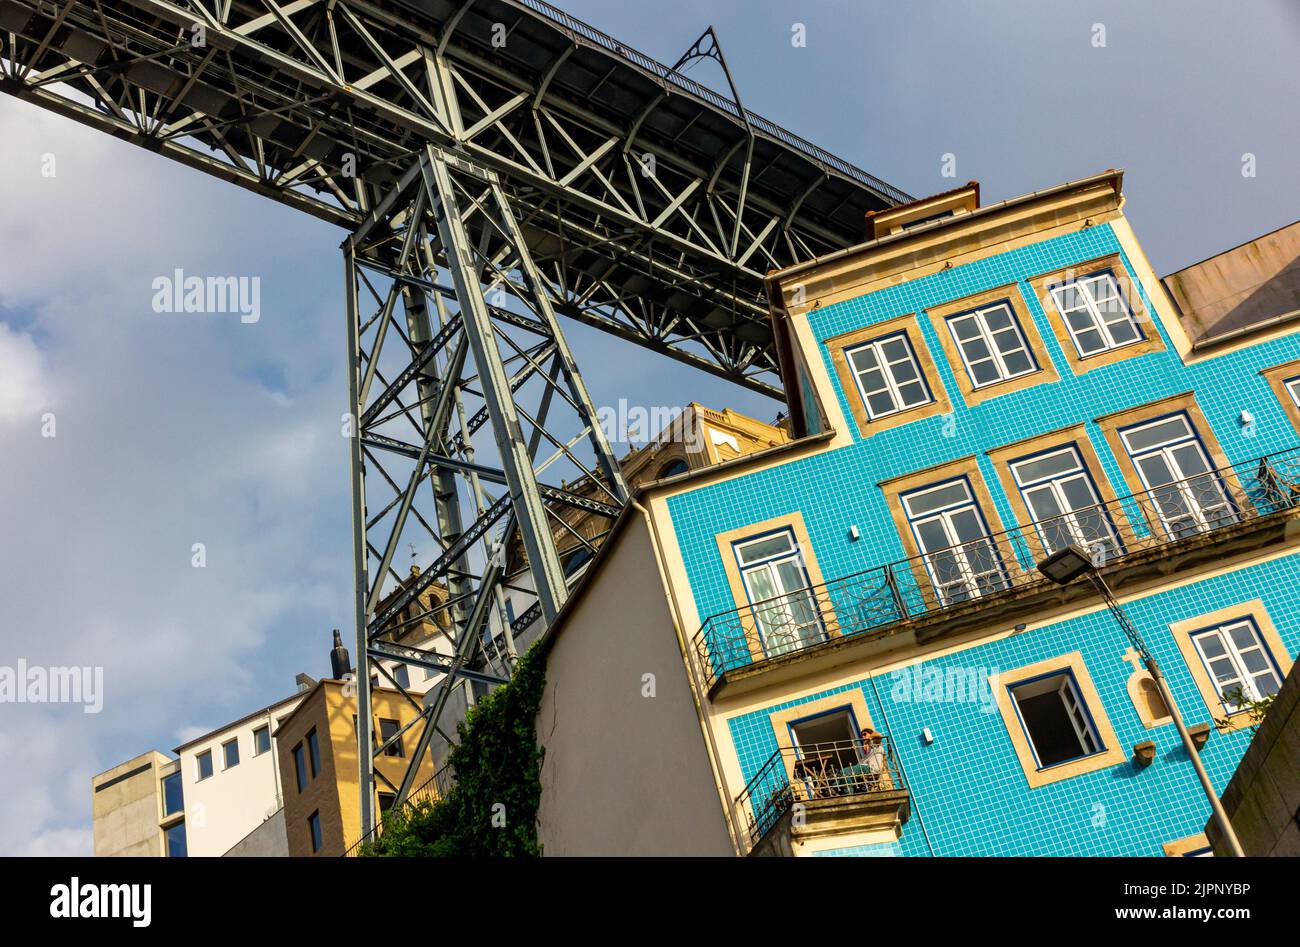 Pont Luiz 1 bridge over the River Douro in Porto Portugal designed by Theophile Seyrig a partner of Gustave Eiffel and used by trams and pedestrians. Stock Photo